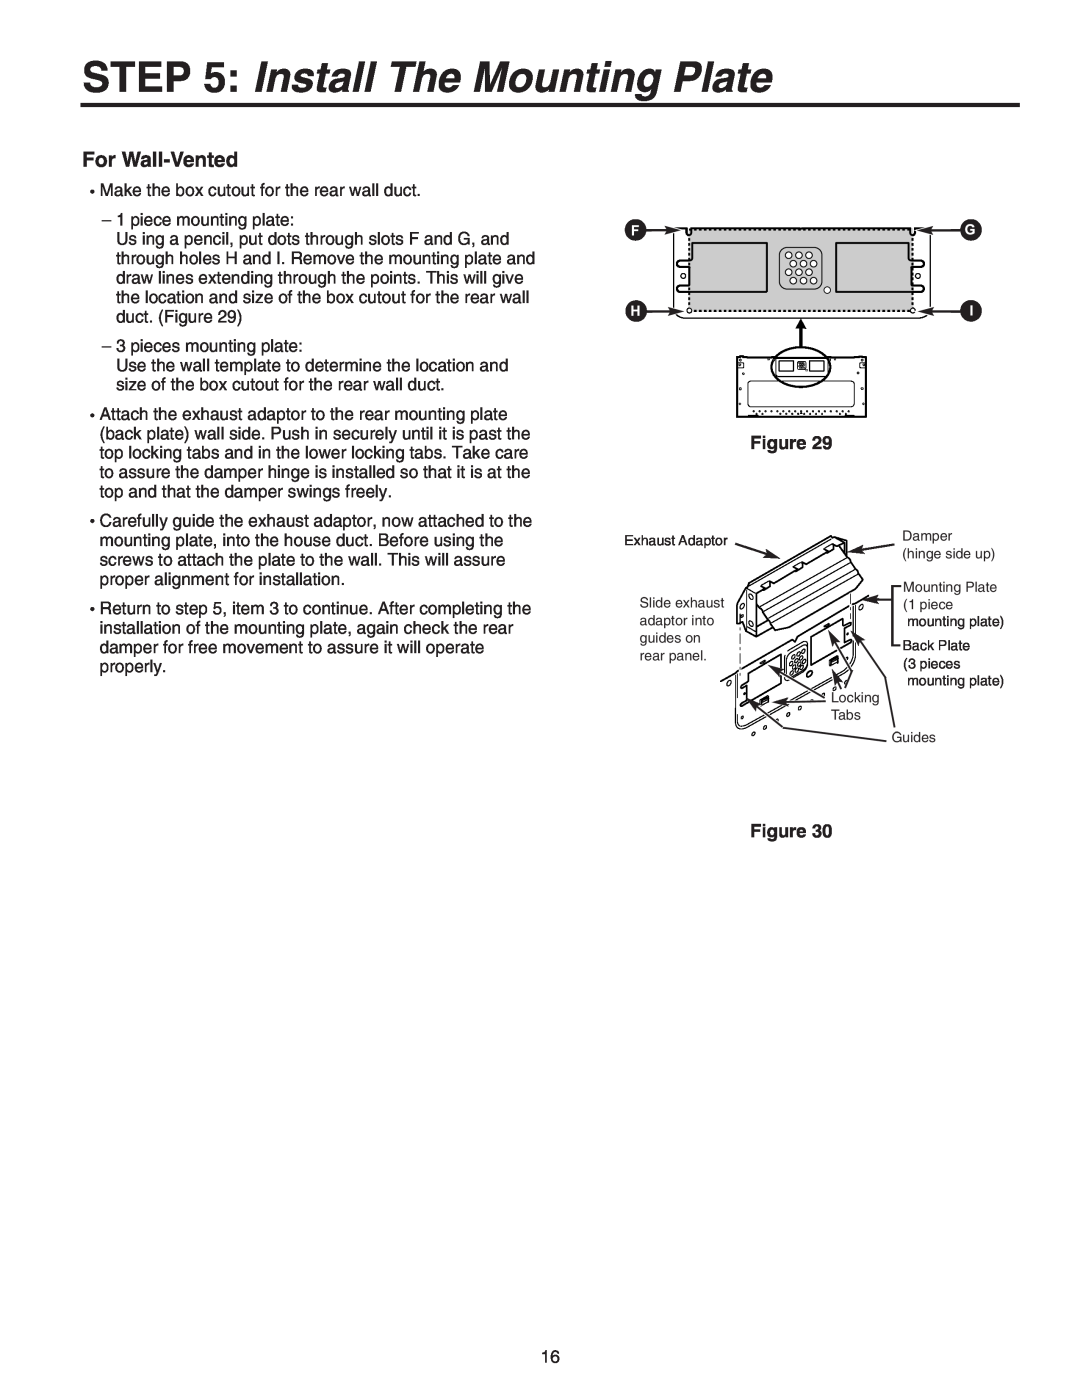 Maytag 8101P641-60 installation instructions For Wall-Vented, Install The Mounting Plate 